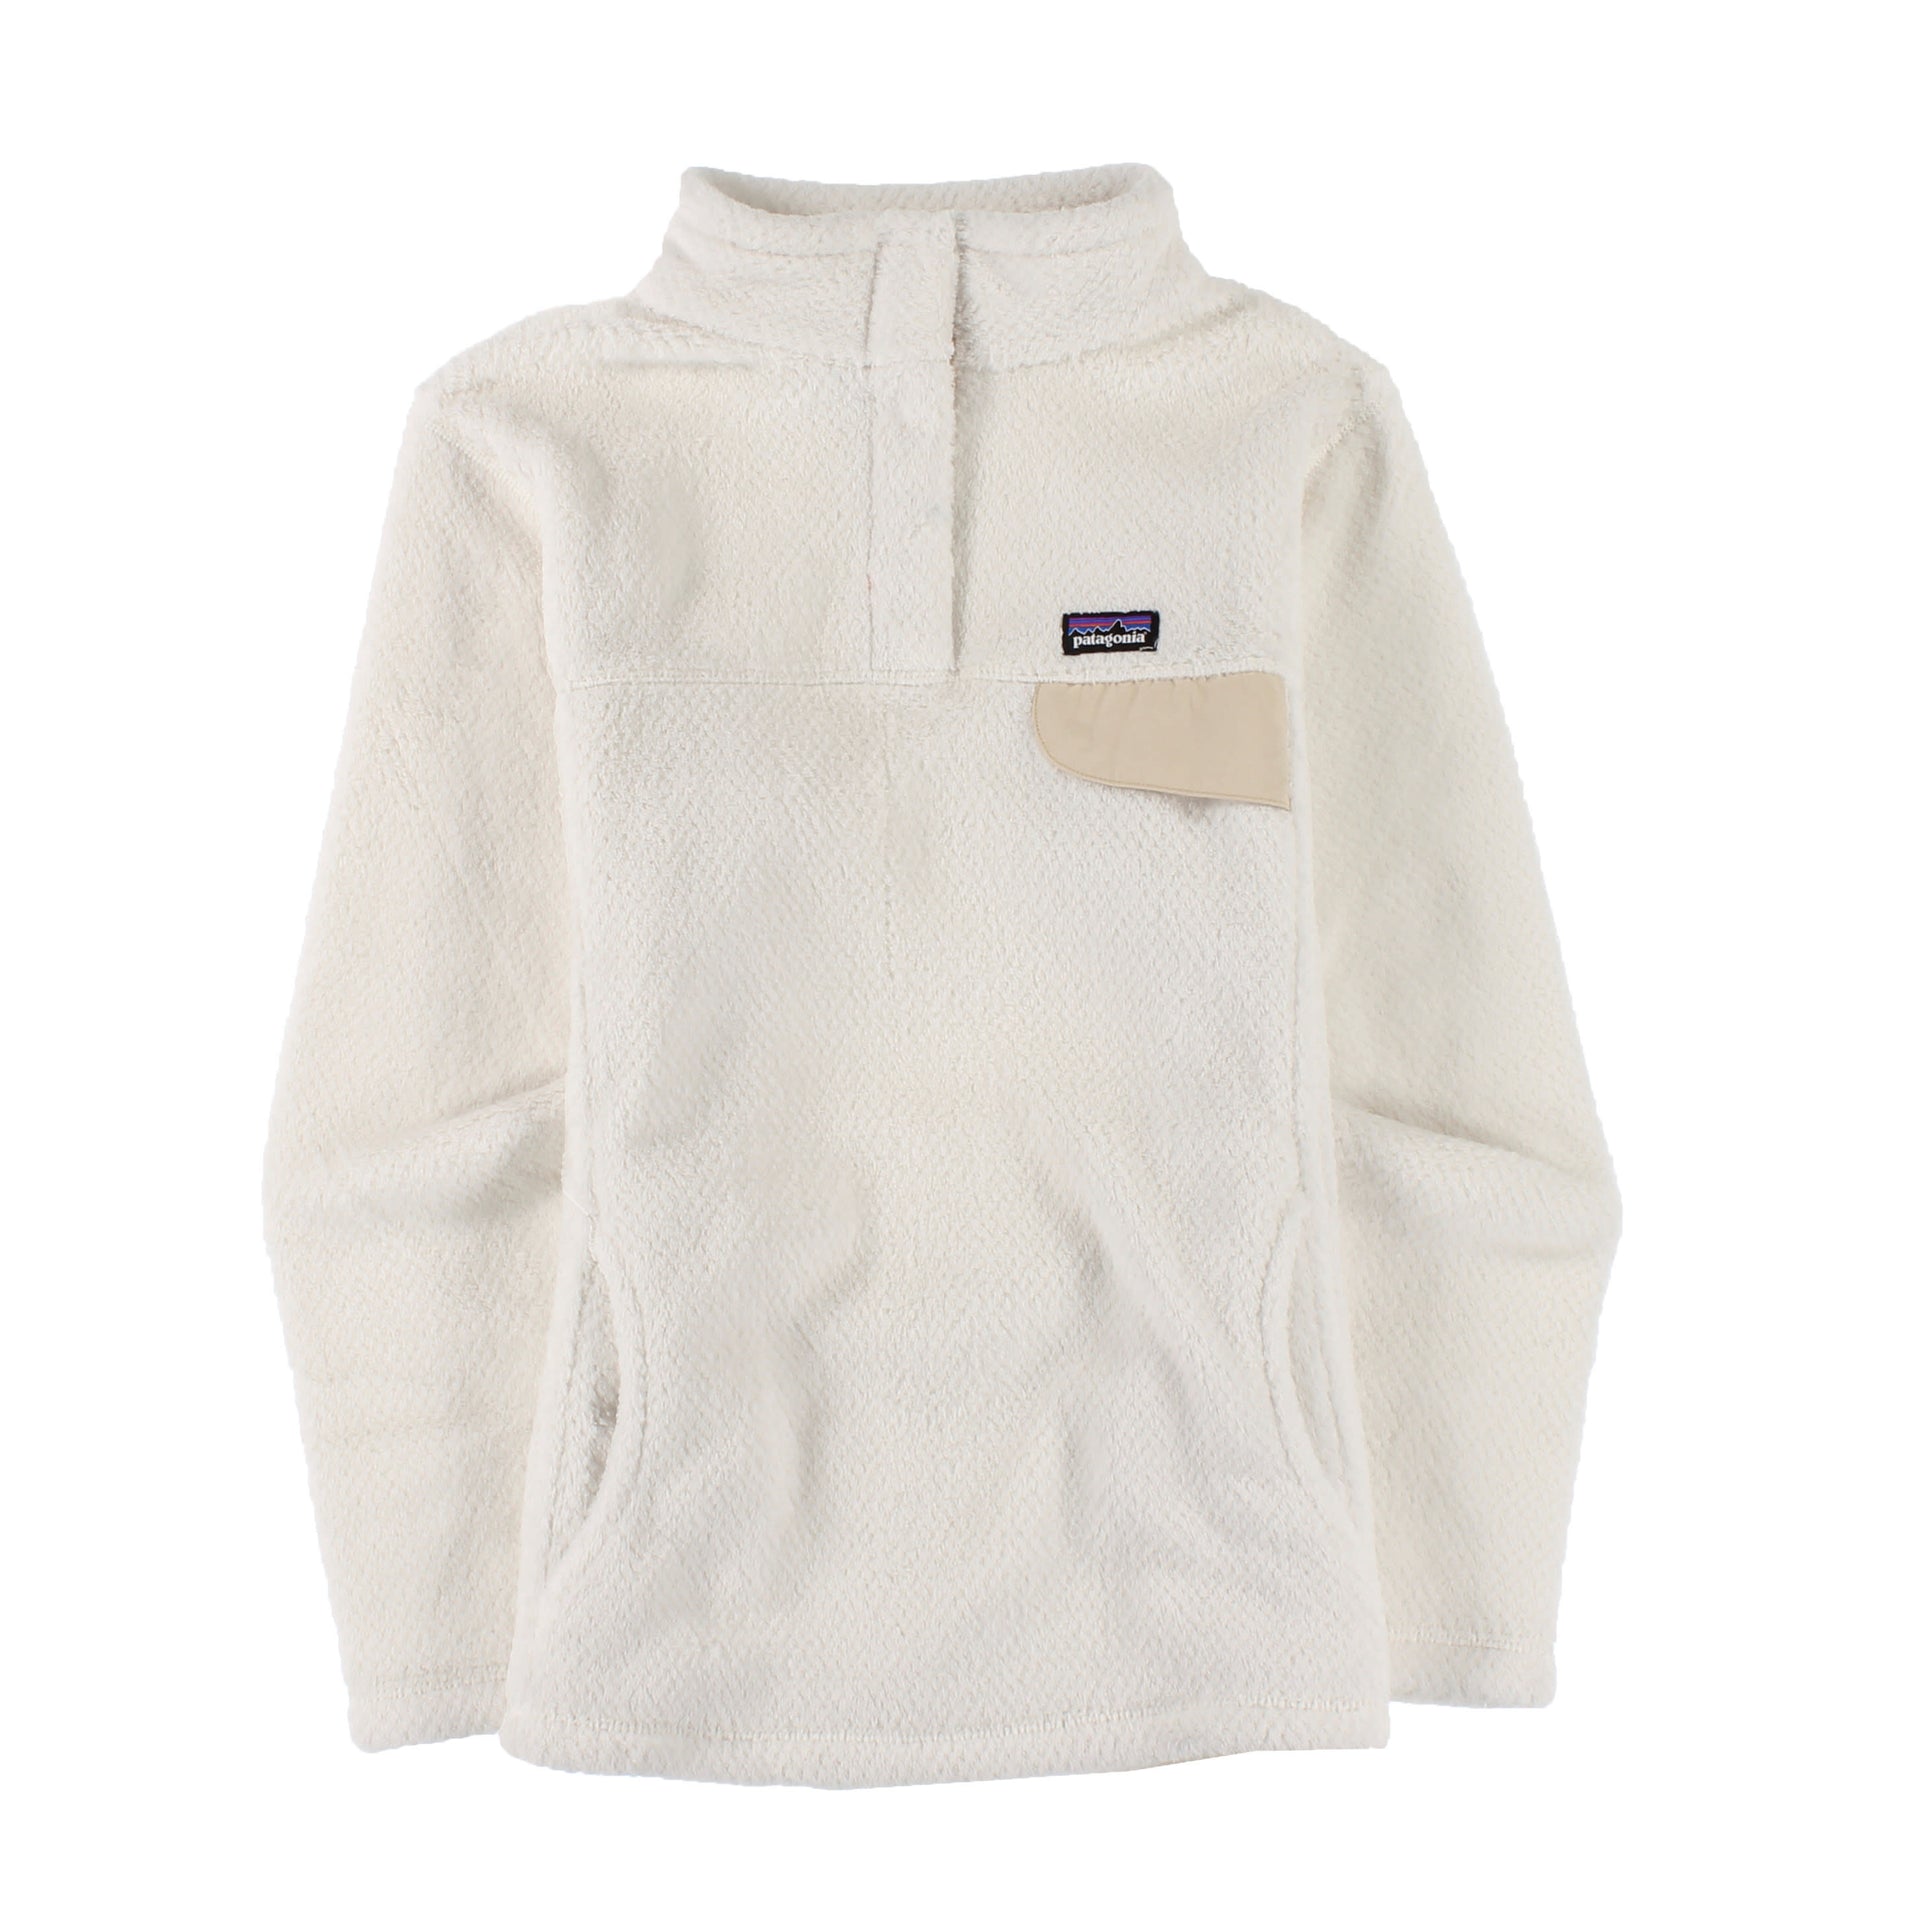 Snap T Pullover Patagonia Worn Wear